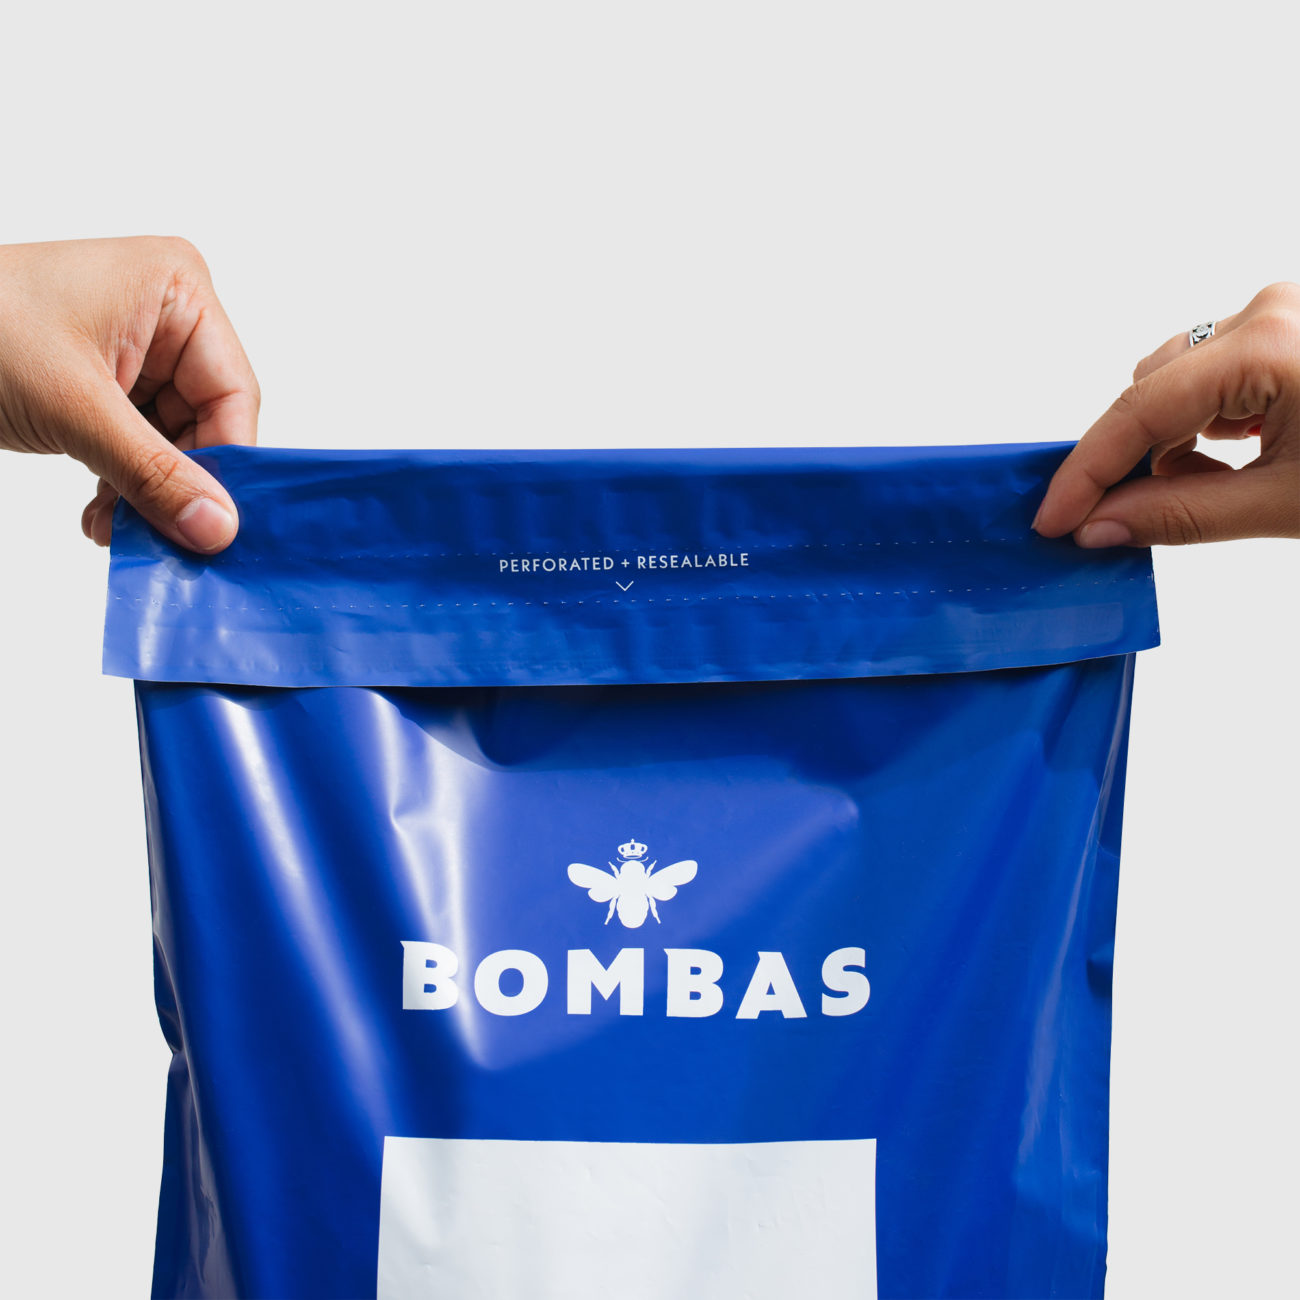 Bombas uses Lumi to produce returnable mailers with double perforations and resealable strips Release Notes: 7 New Sustainability Properties to Reduce and Reuse Packaging